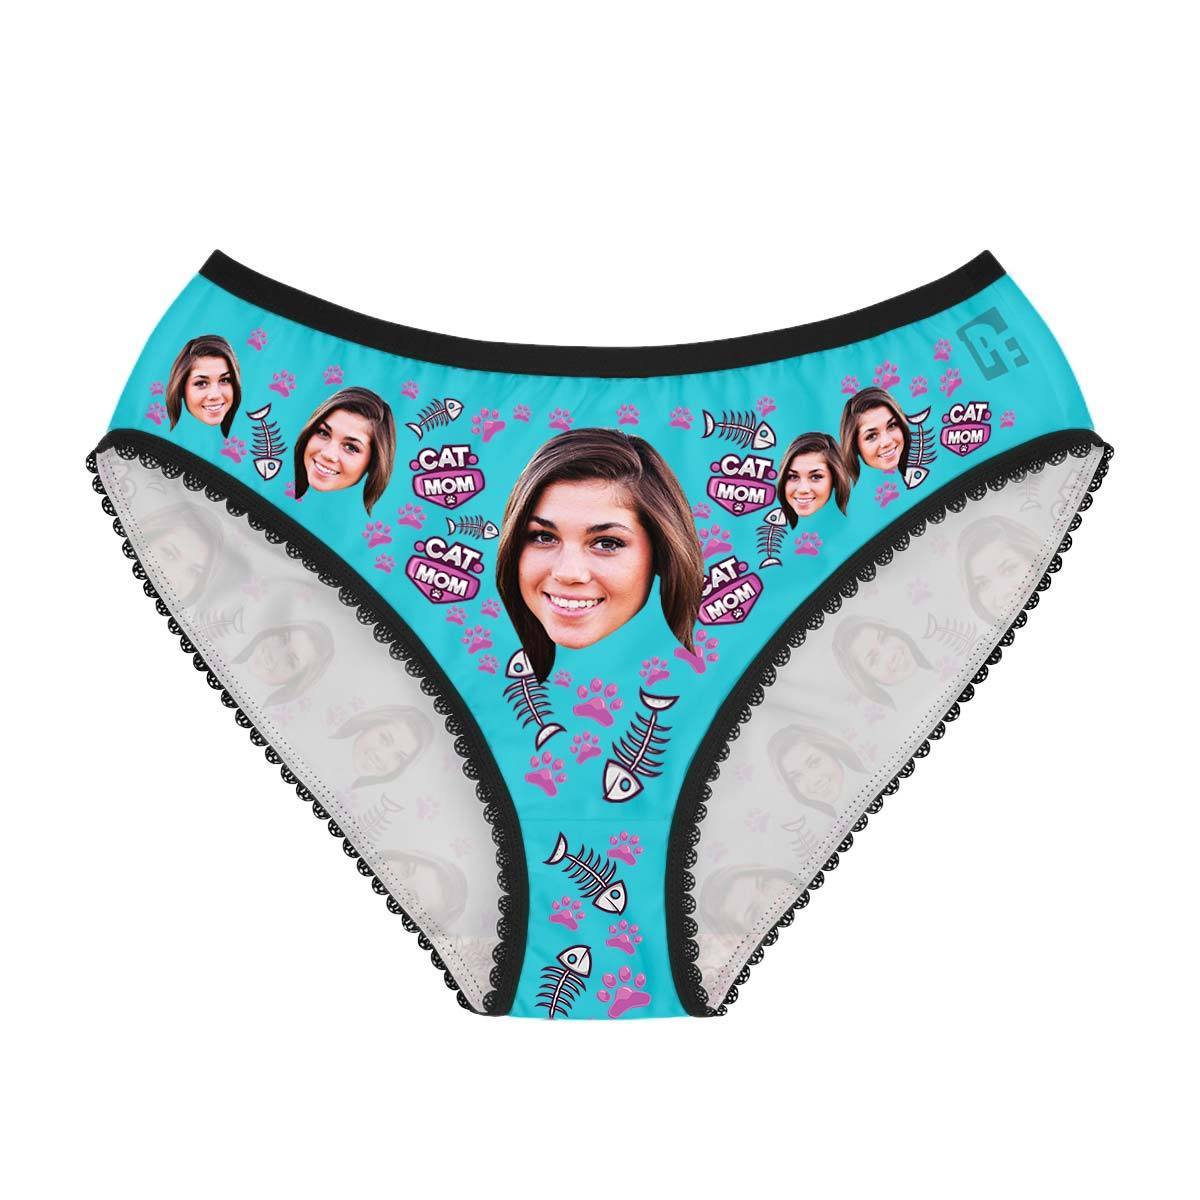 Blue Cat Mom women's underwear briefs personalized with photo printed on them